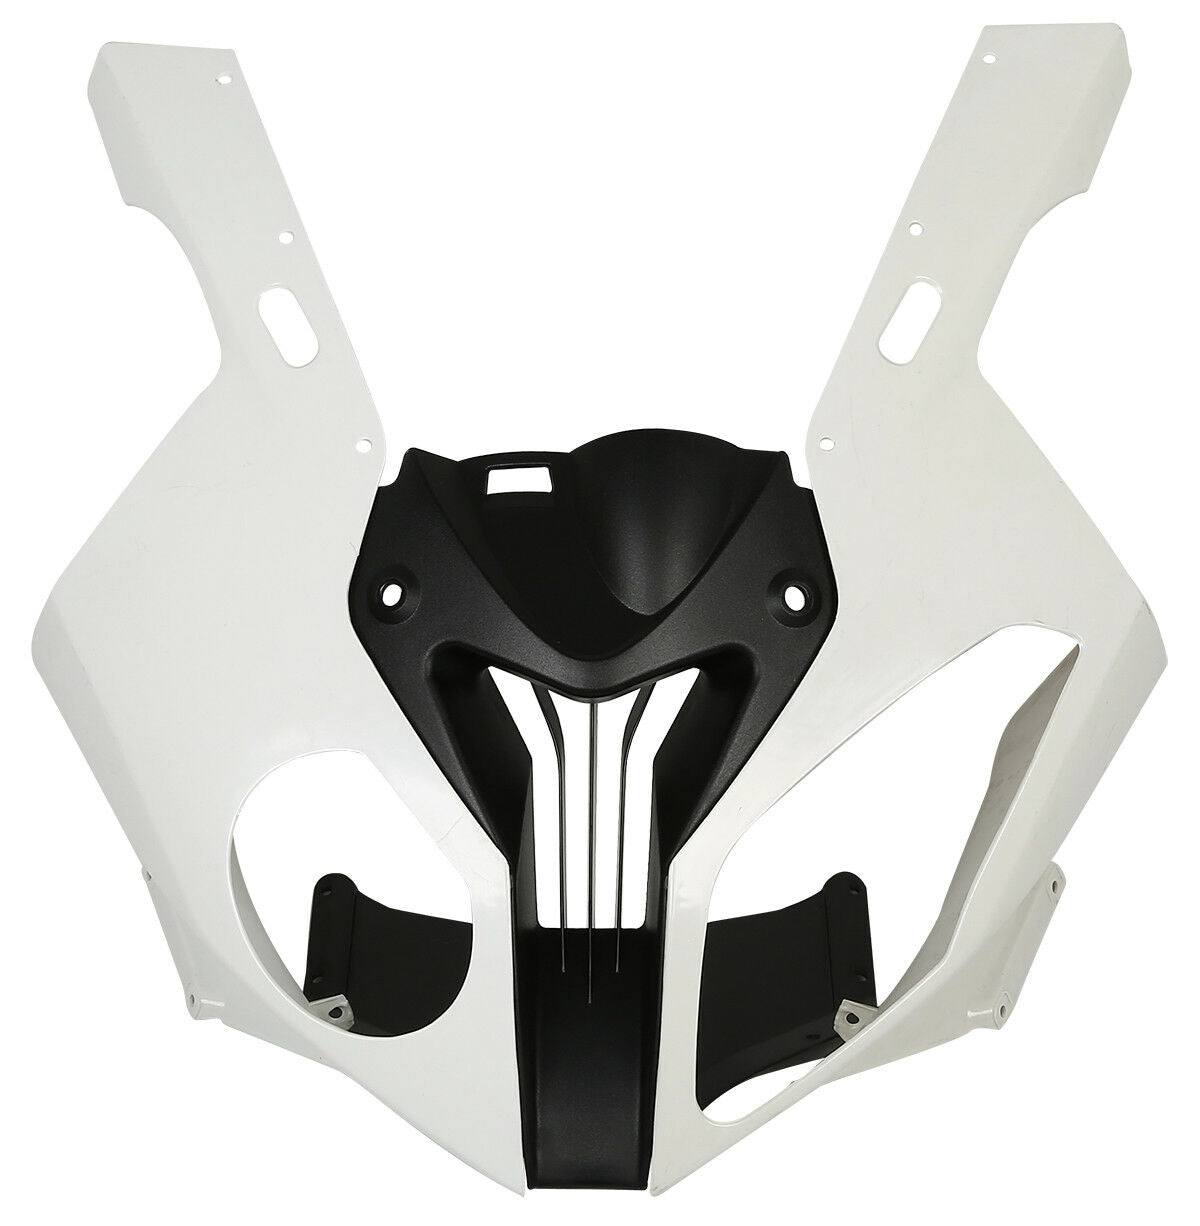 Unpainted ABS Plastic Fairing Bodywork Kit Fit For Motorcycle BMW S1000RR 09-14 - Moto Life Products